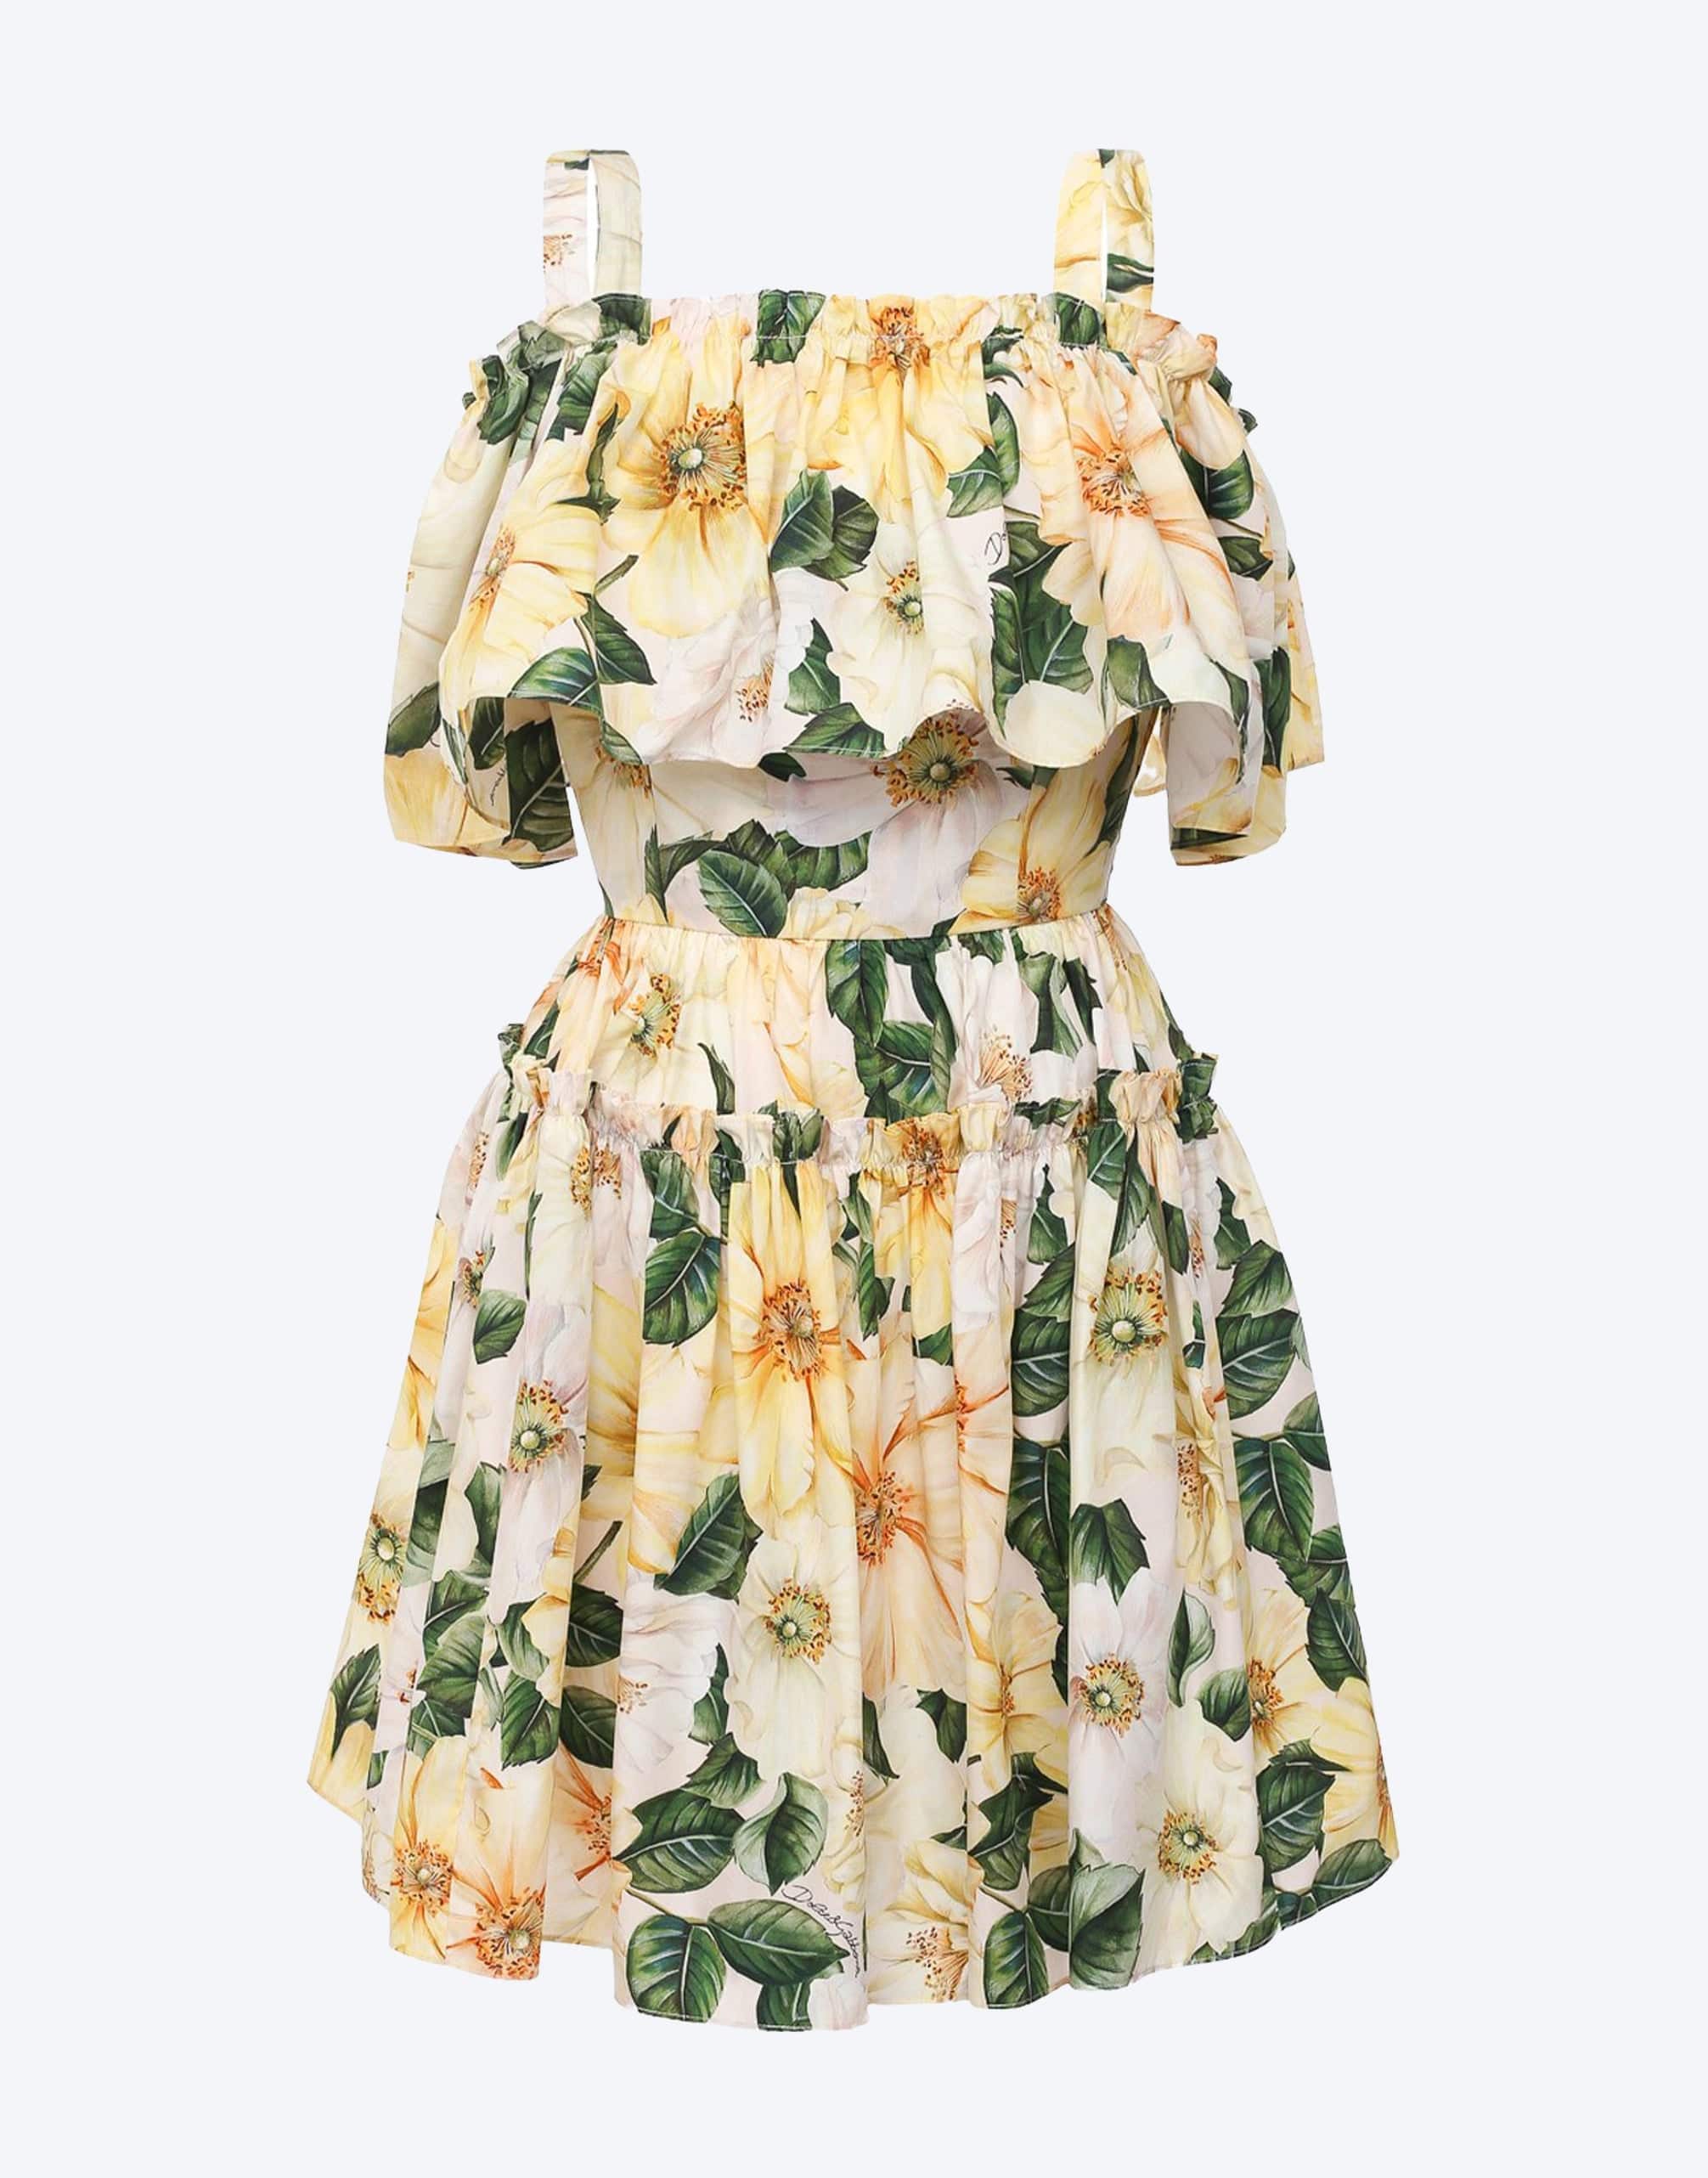 Dolce & Gabbana Dresses, Sale Up To 70% Off